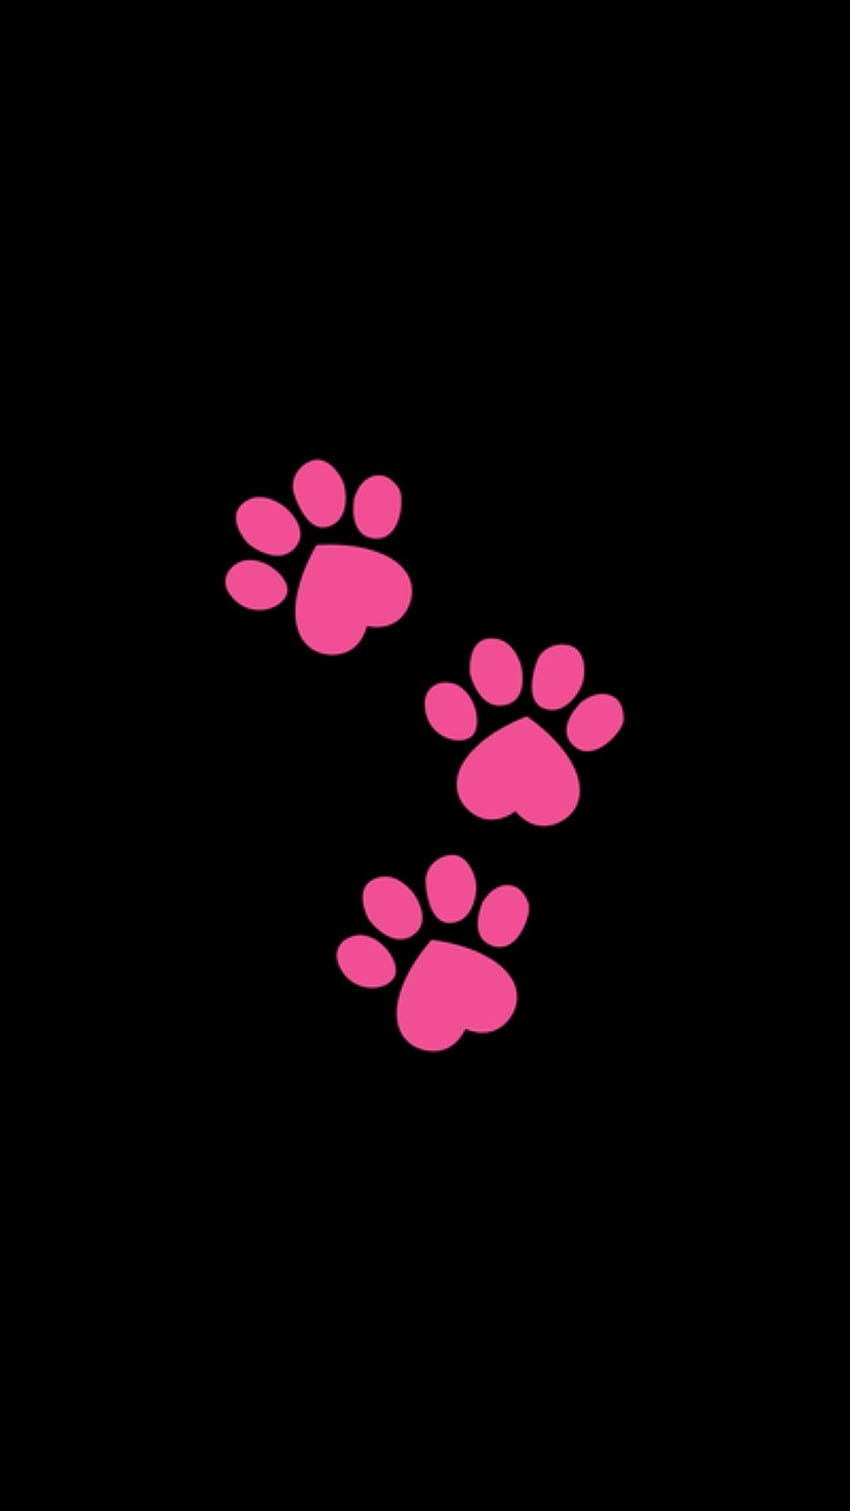 Paw Background Images HD Pictures and Wallpaper For Free Download  Pngtree